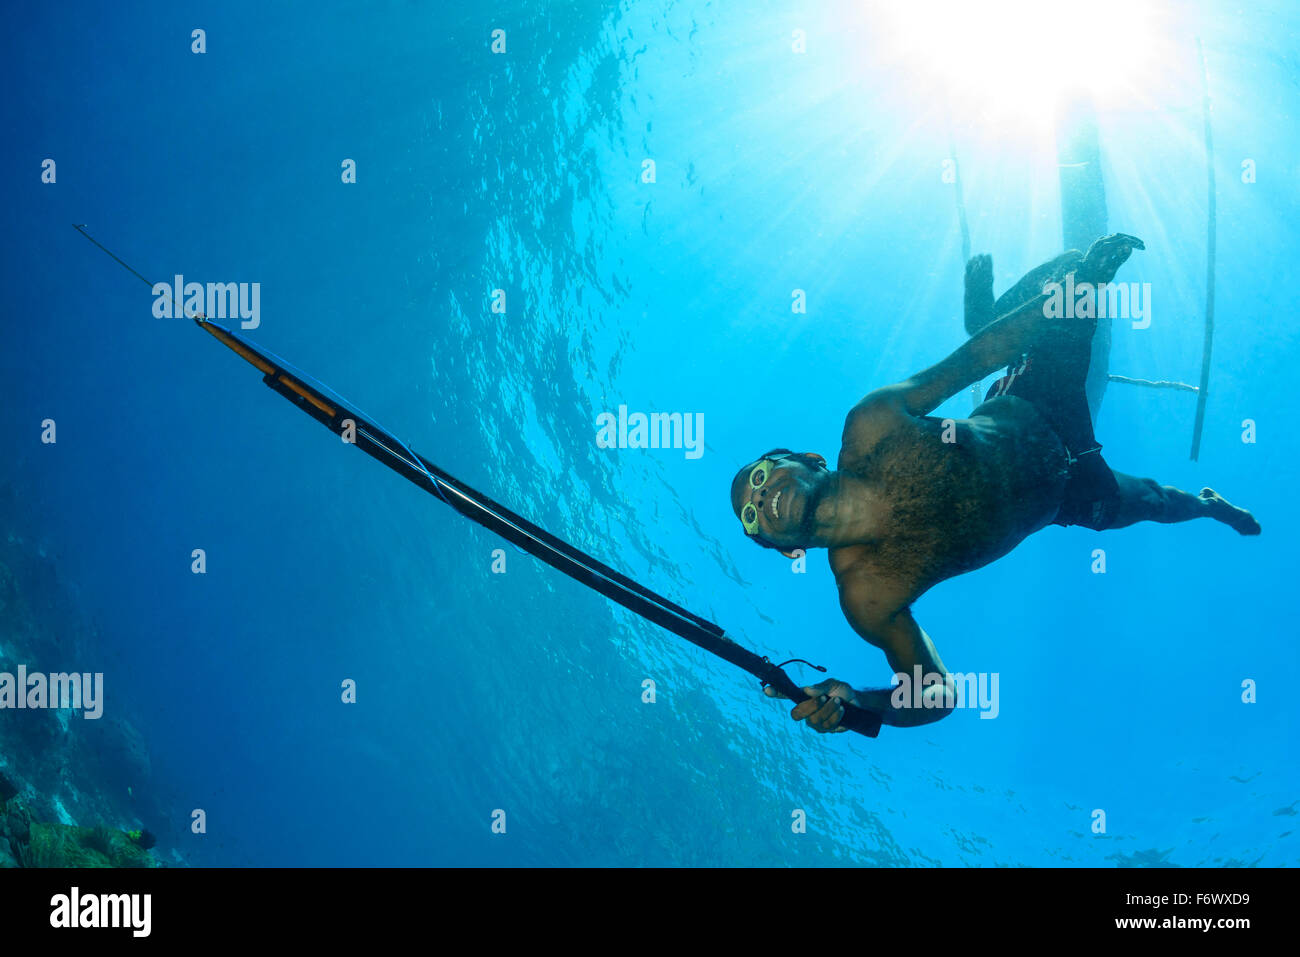 Local Spear Fisherman with outrigger boat, Alor Archipelago, Indonesia, Sawu Sea, Pantarstrait, Indian Ocean Stock Photo